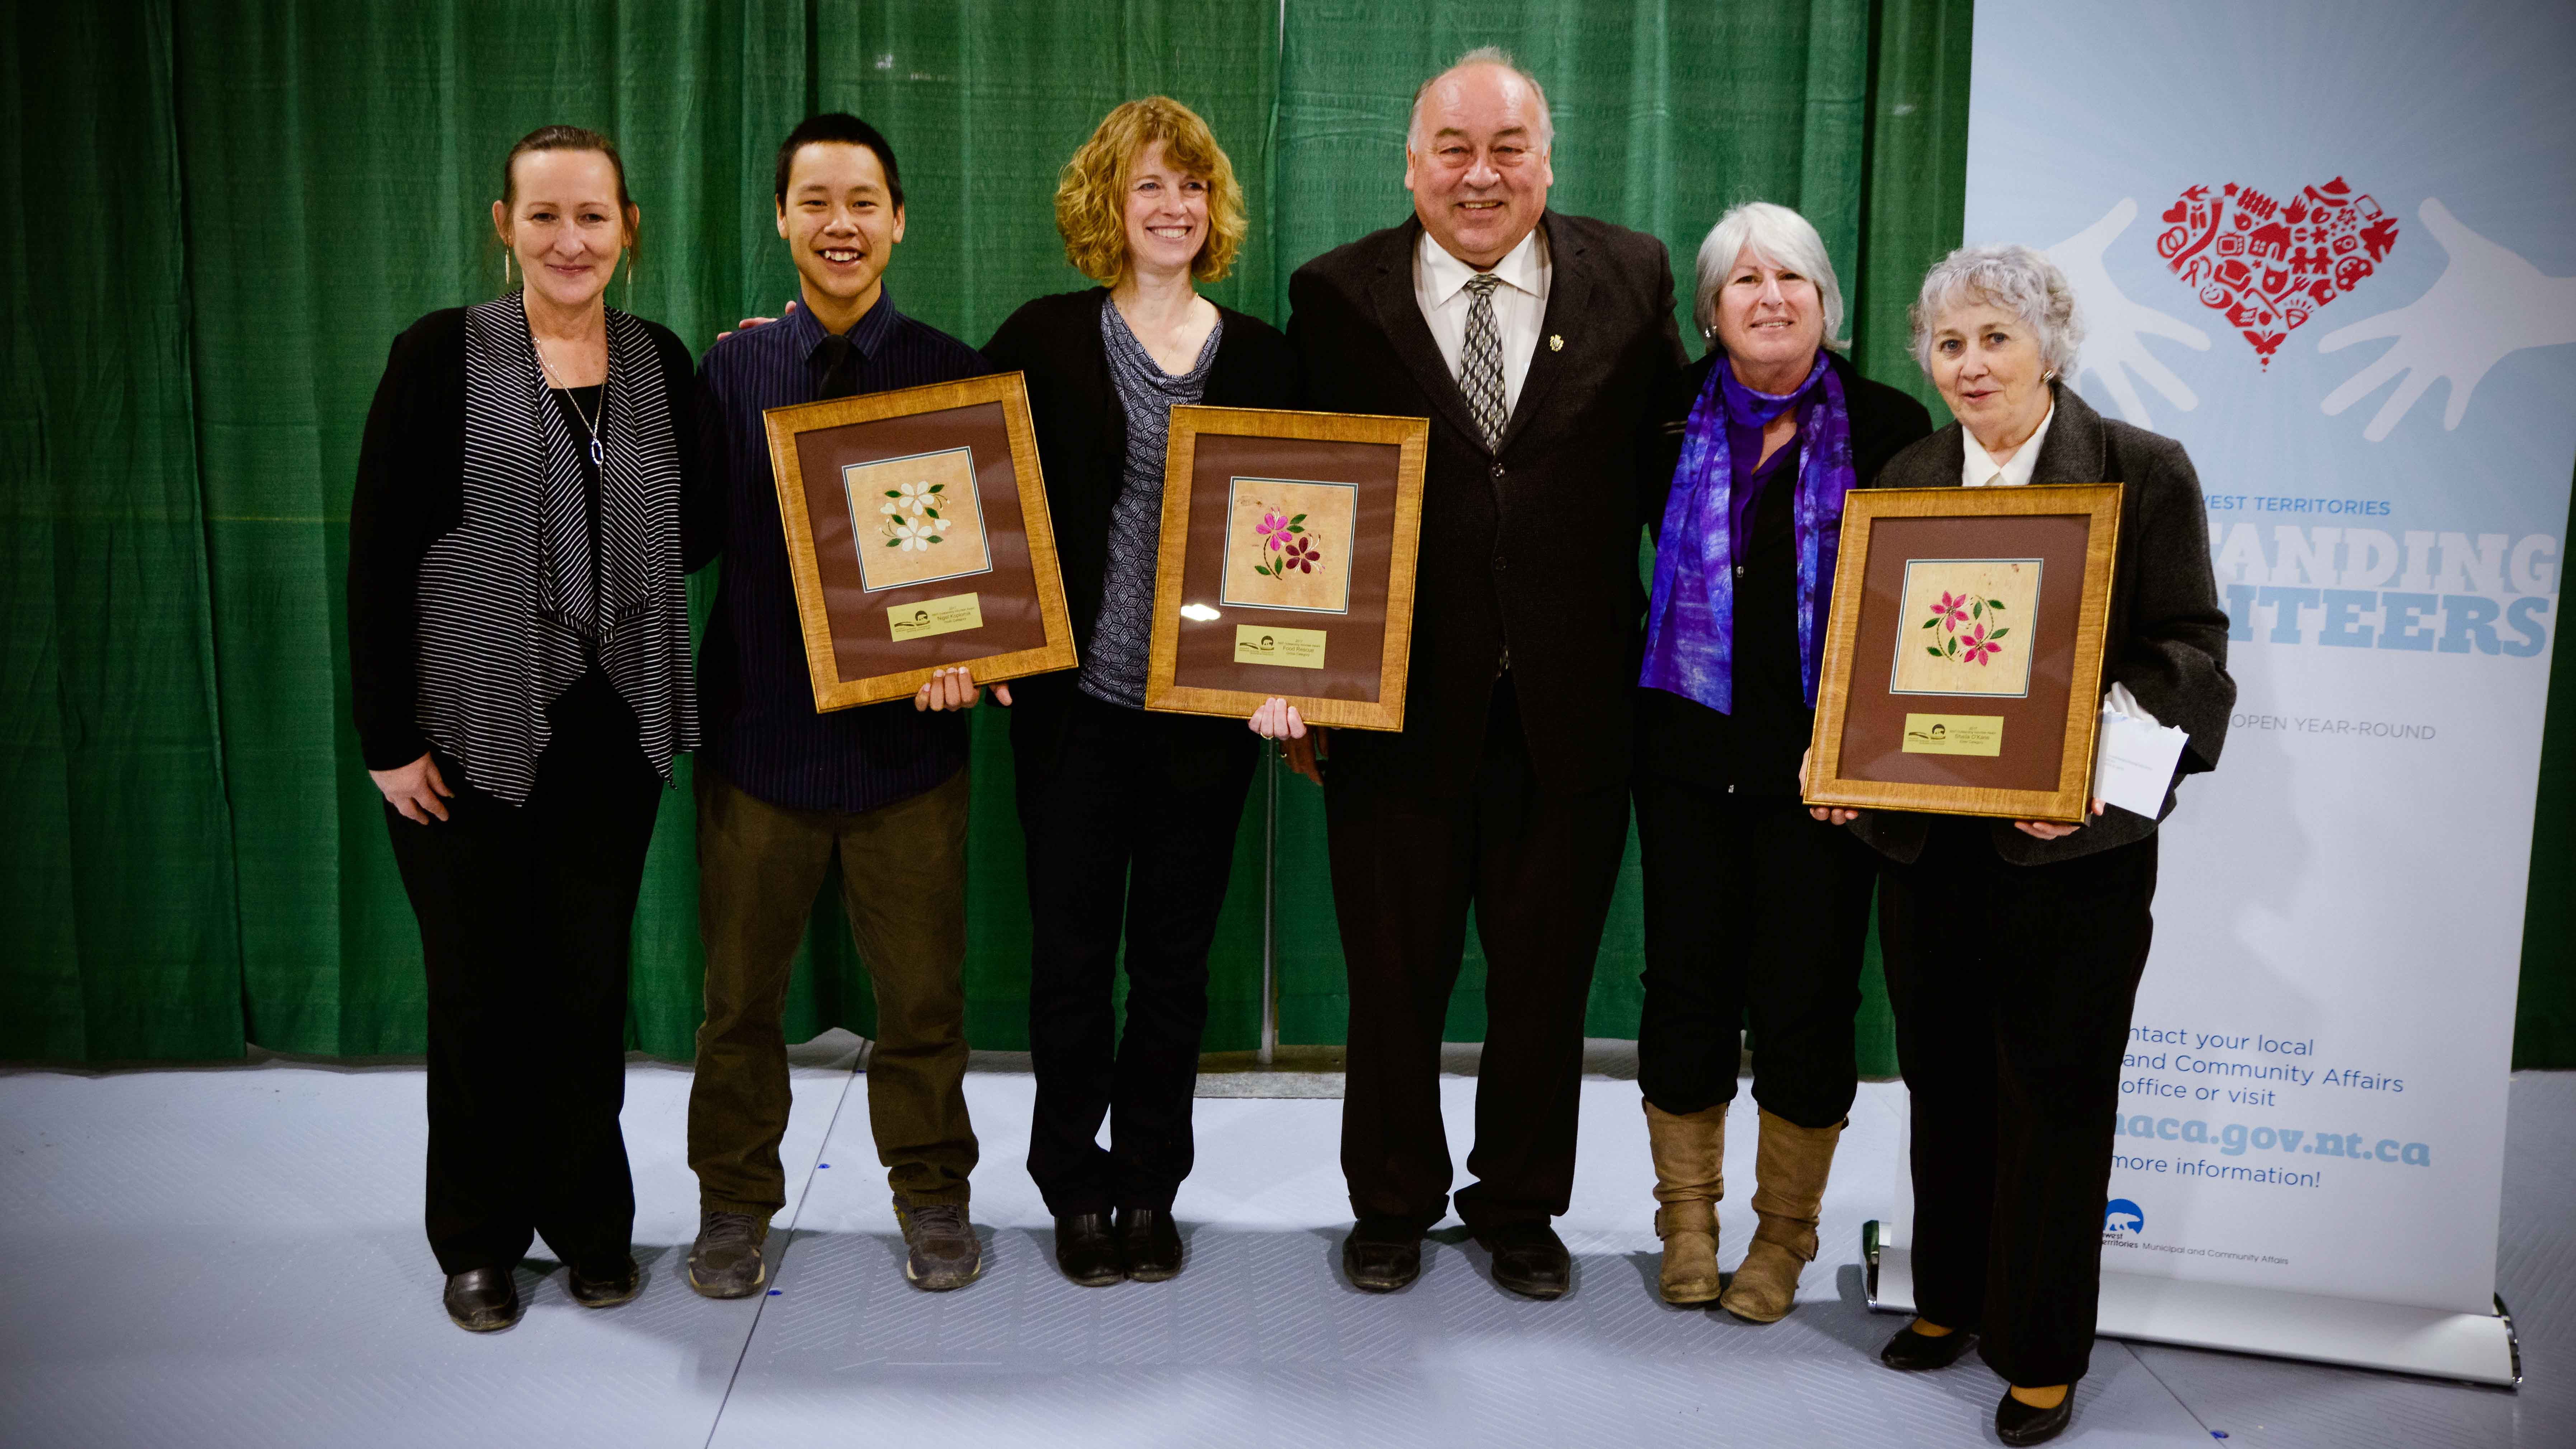 2017 winners of the NWT's Outstanding Volunteer Awards included Sheila O’Kane, Nigel Koplomik, Food Rescue, and Sudhir Jha (not pictured) - GNWT